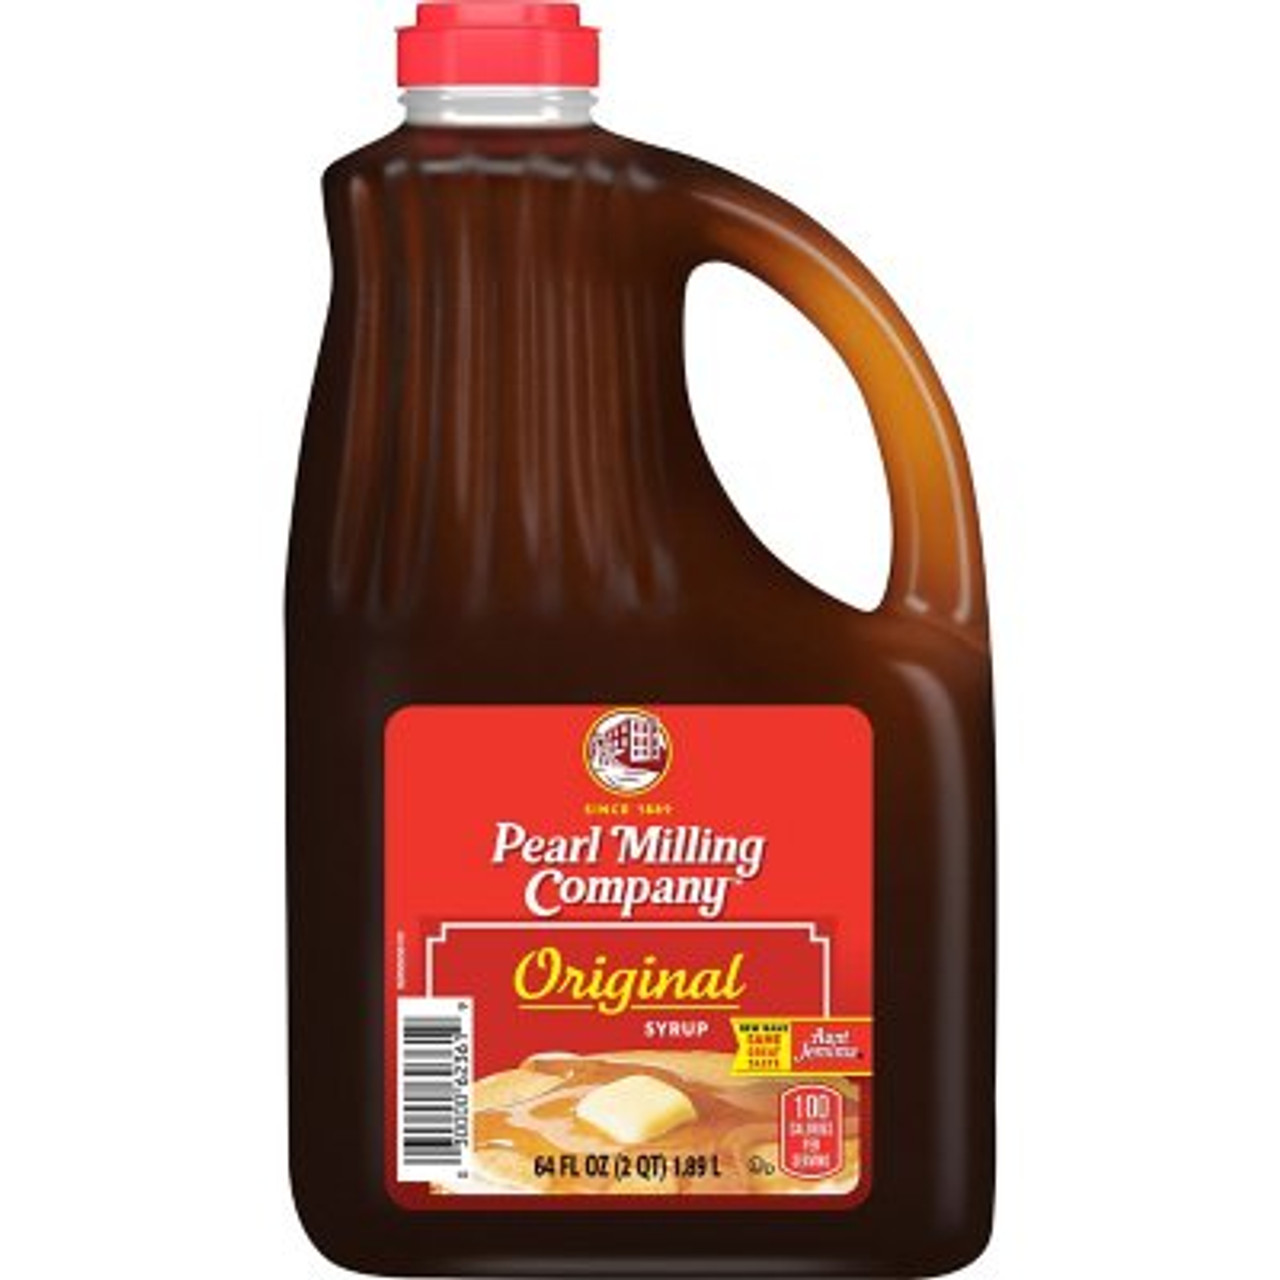 Pearl Milling Company Original Syrup (64 oz.) - *In Store